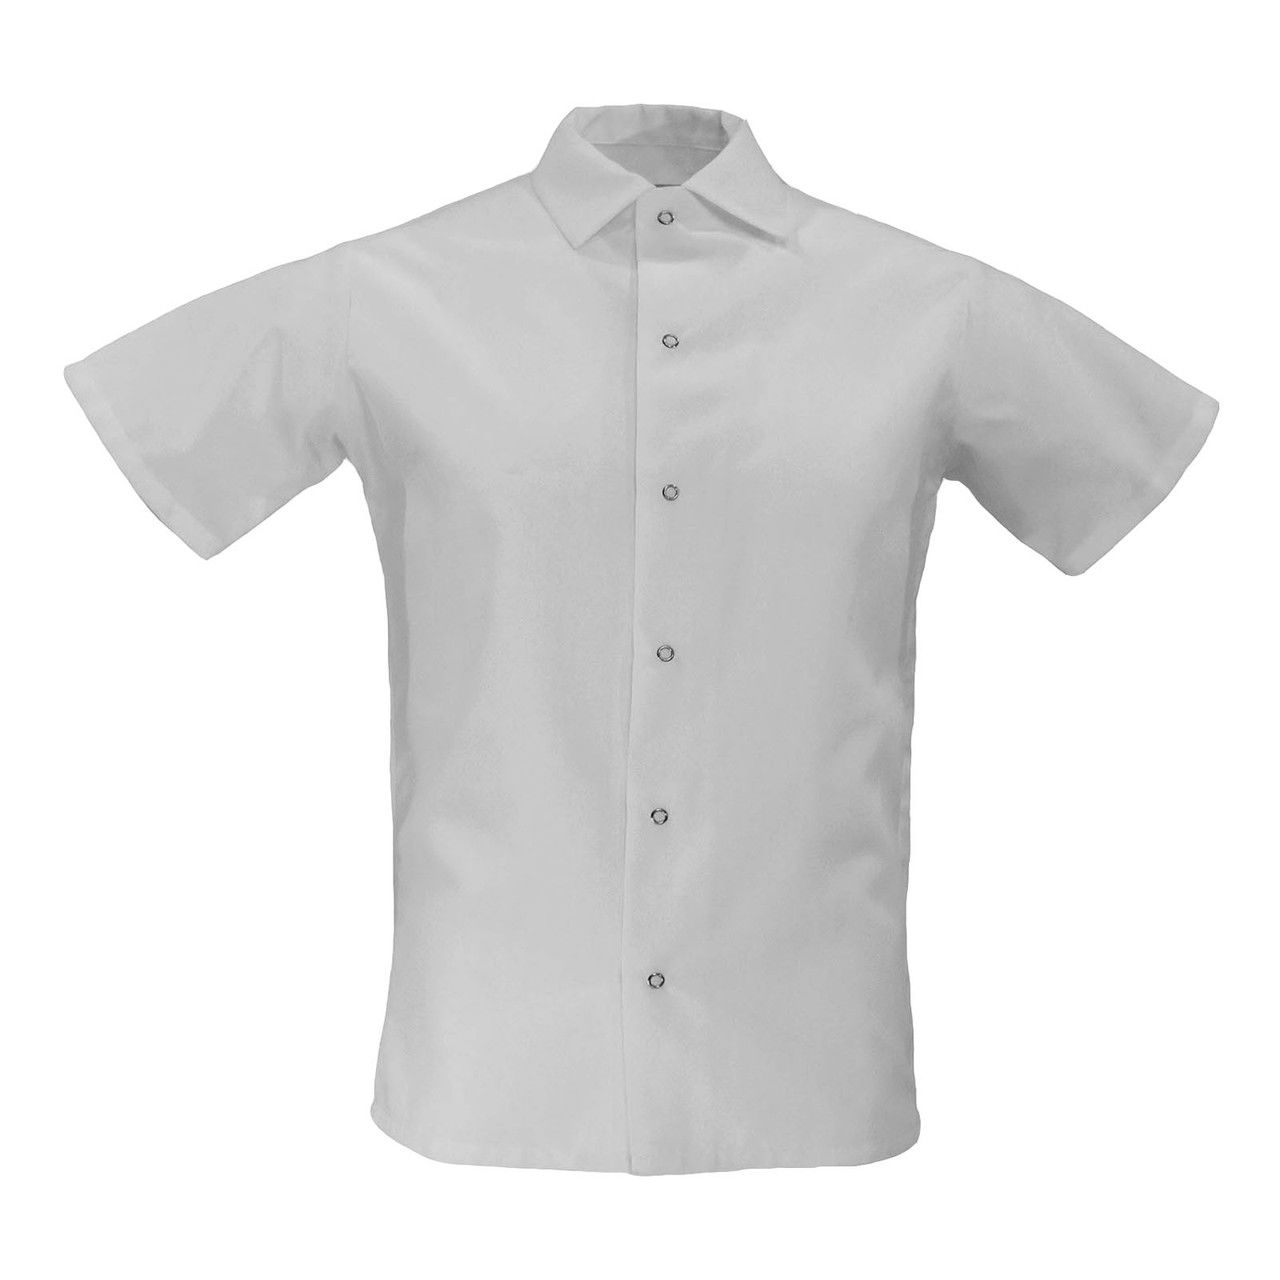 Pinnacle S315 White Cook Shirts, No Pocket Questions & Answers